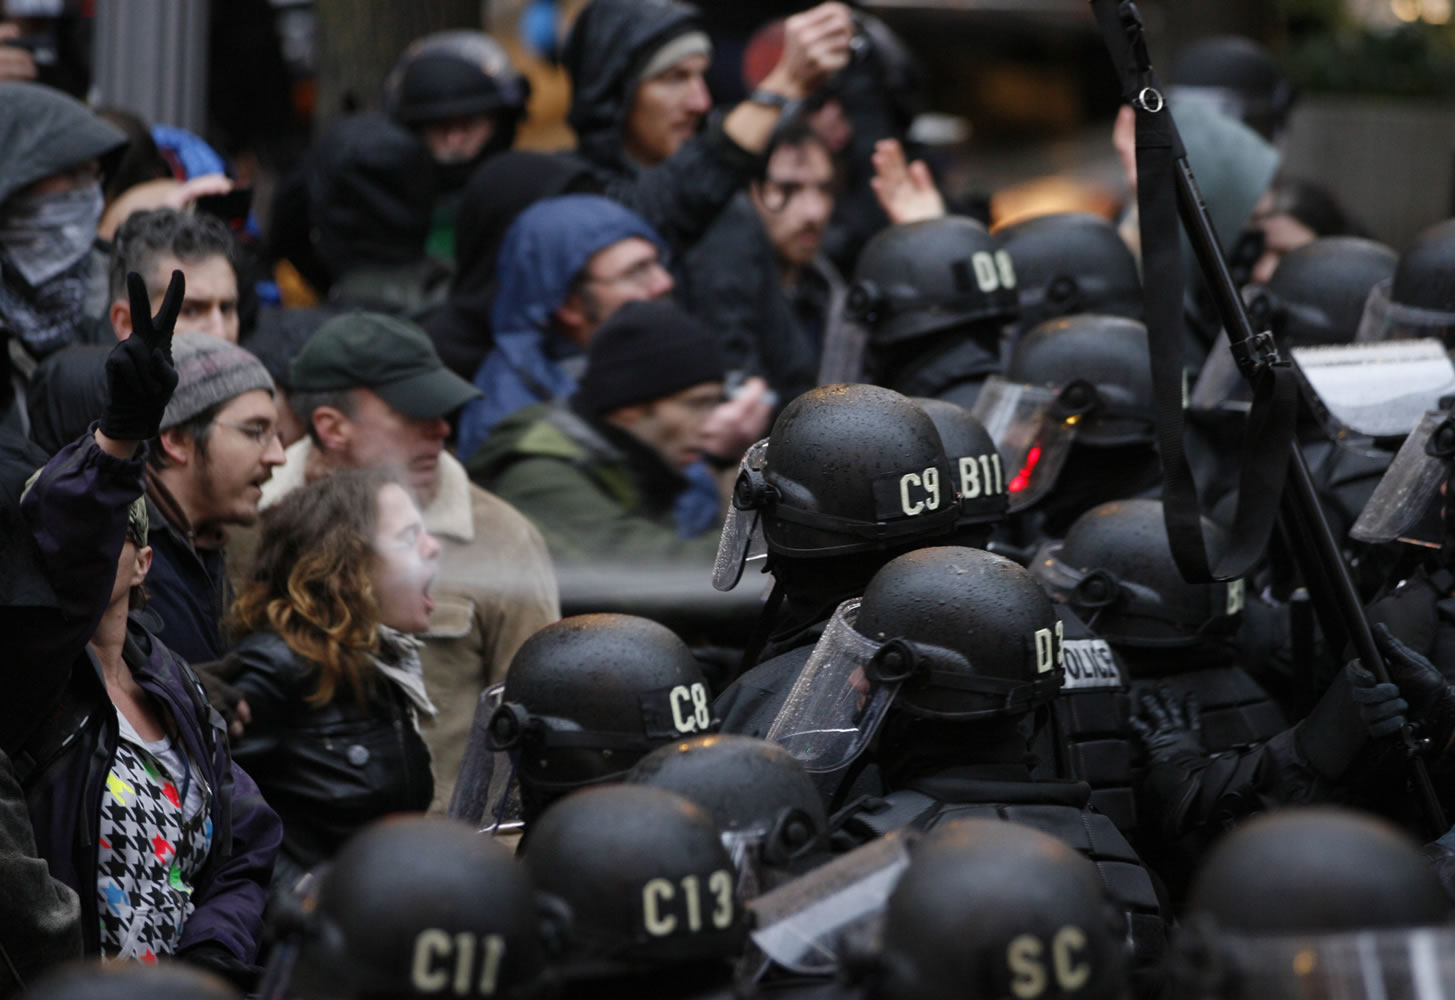 A Portland police officer -- reportedly, Jeffrey McDaniel -- uses pepper spray on Liz Nichols, an Occupy Portland protester, Nov. 17 in Portland.  Nichols' attorneys have filed a $155,000 lawsuit against McDaniel, another officer, and the city.